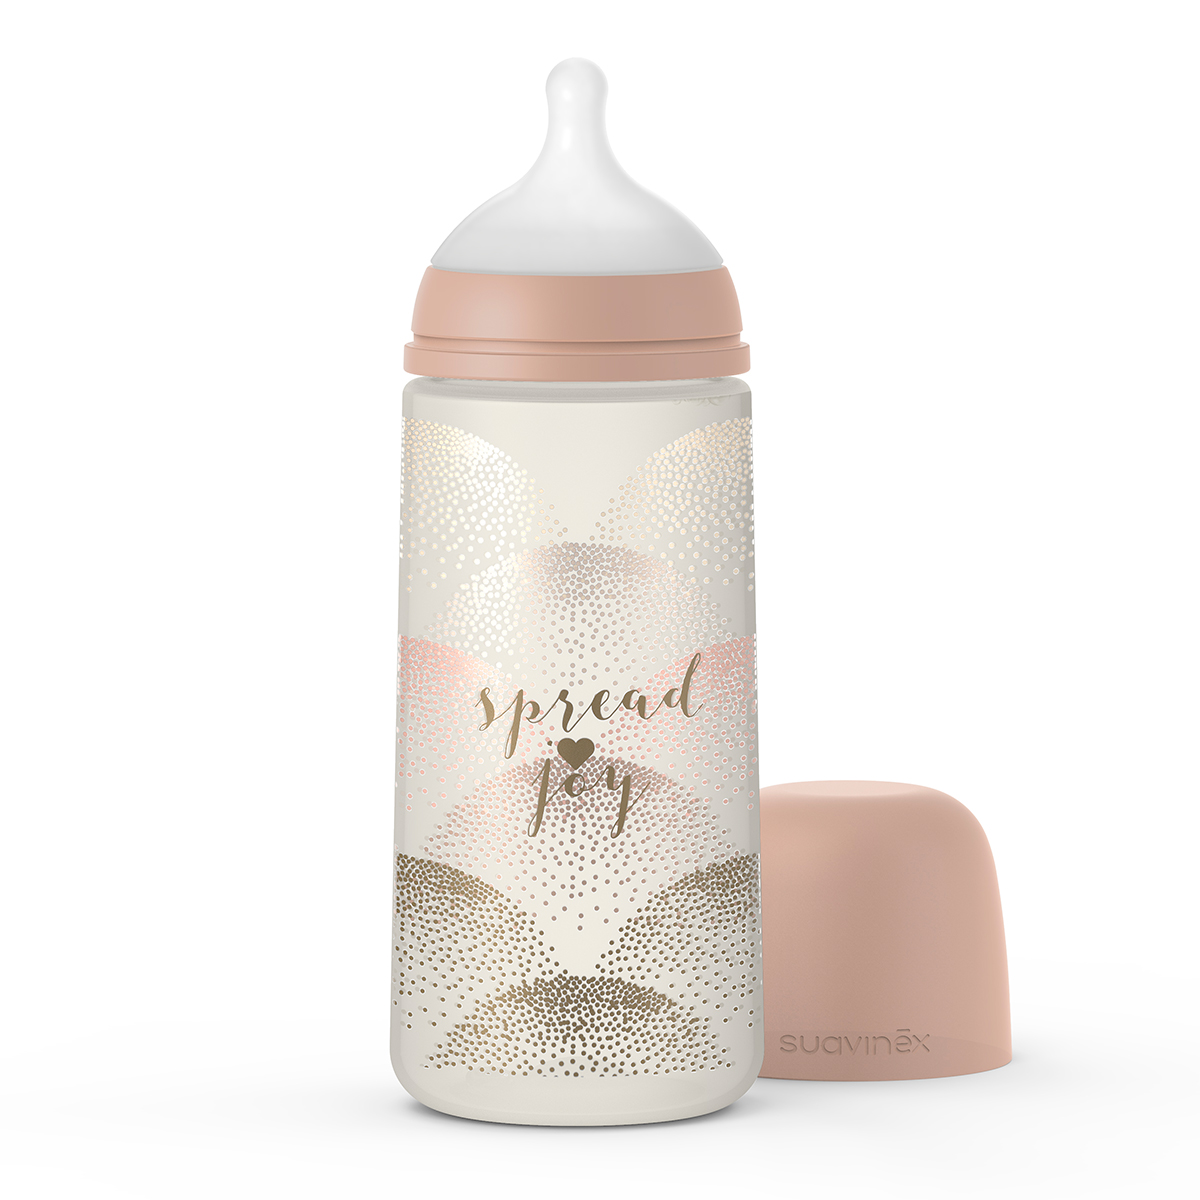 Wide neck bottle with SX PRO™ physiological +6